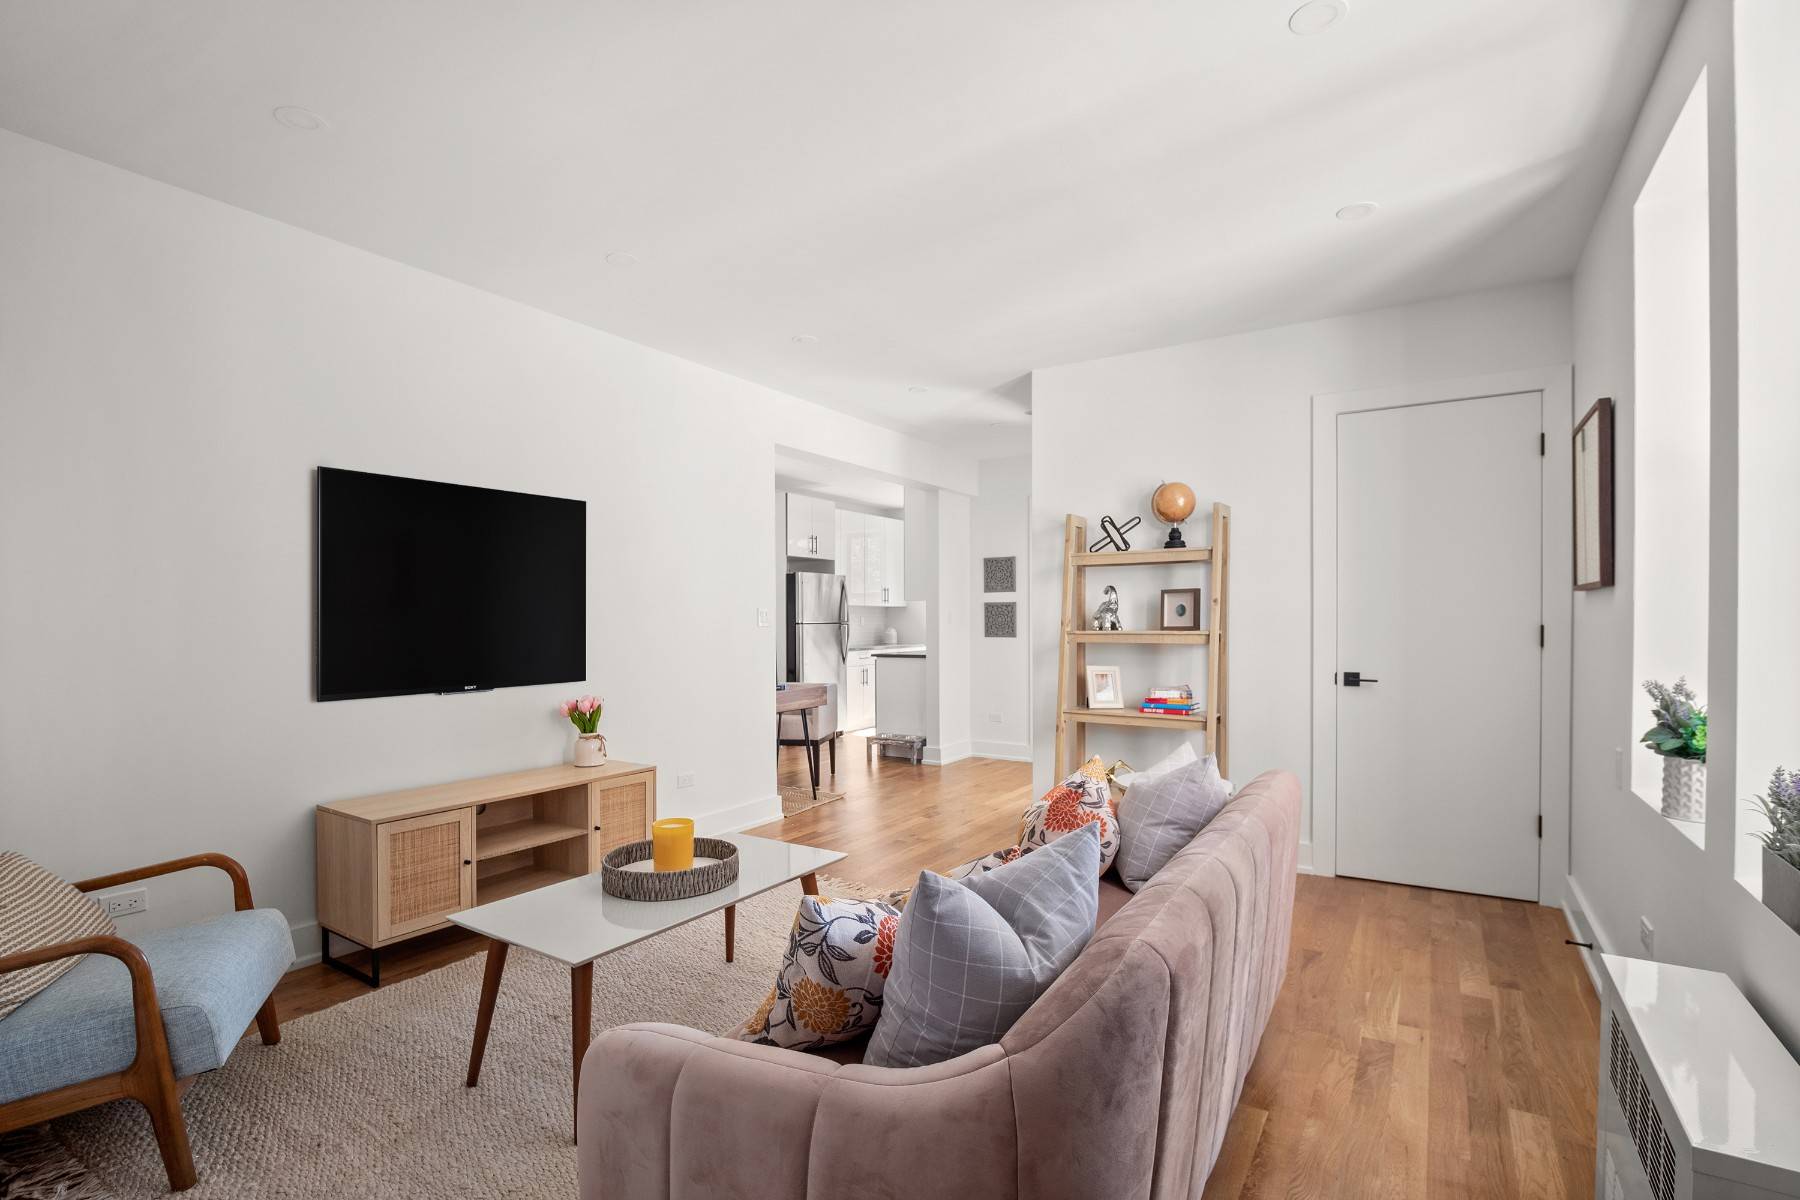 Welcome to Astoria33, the newest pre war condominium conversion project in one of the city's most vibrant communities.